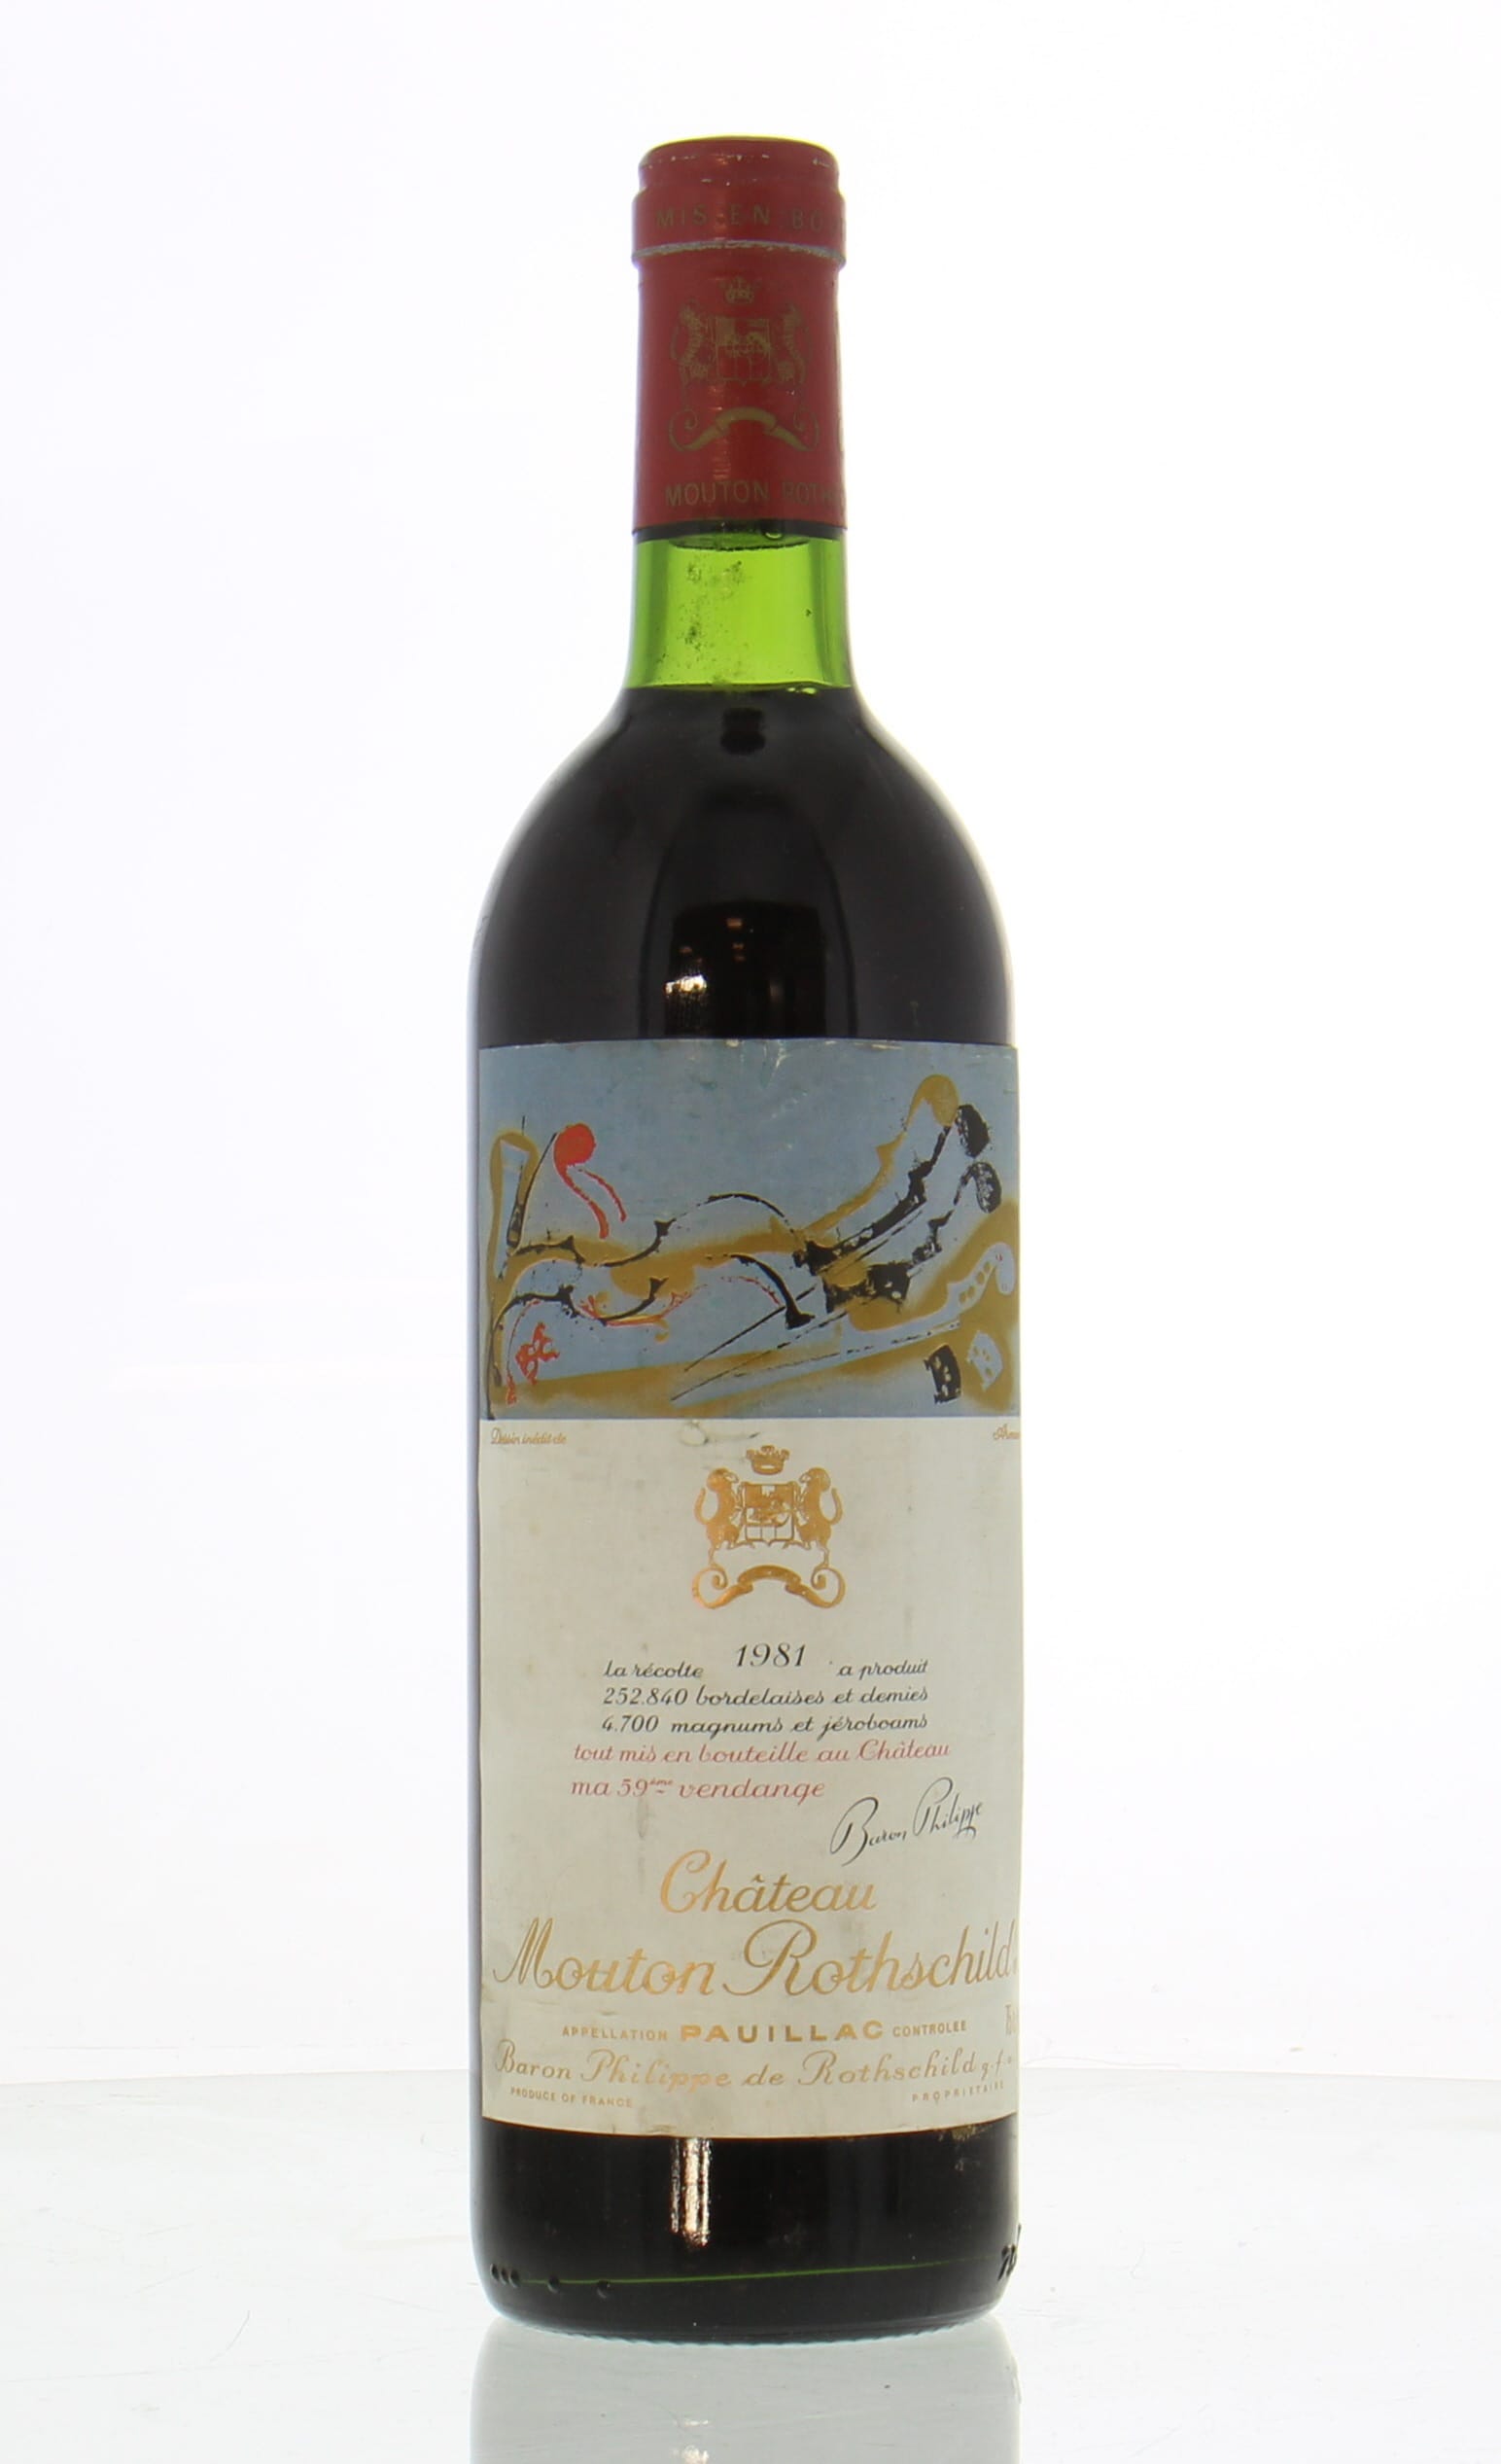 Chateau Mouton Rothschild - Chateau Mouton Rothschild 1981 Base of neck or better